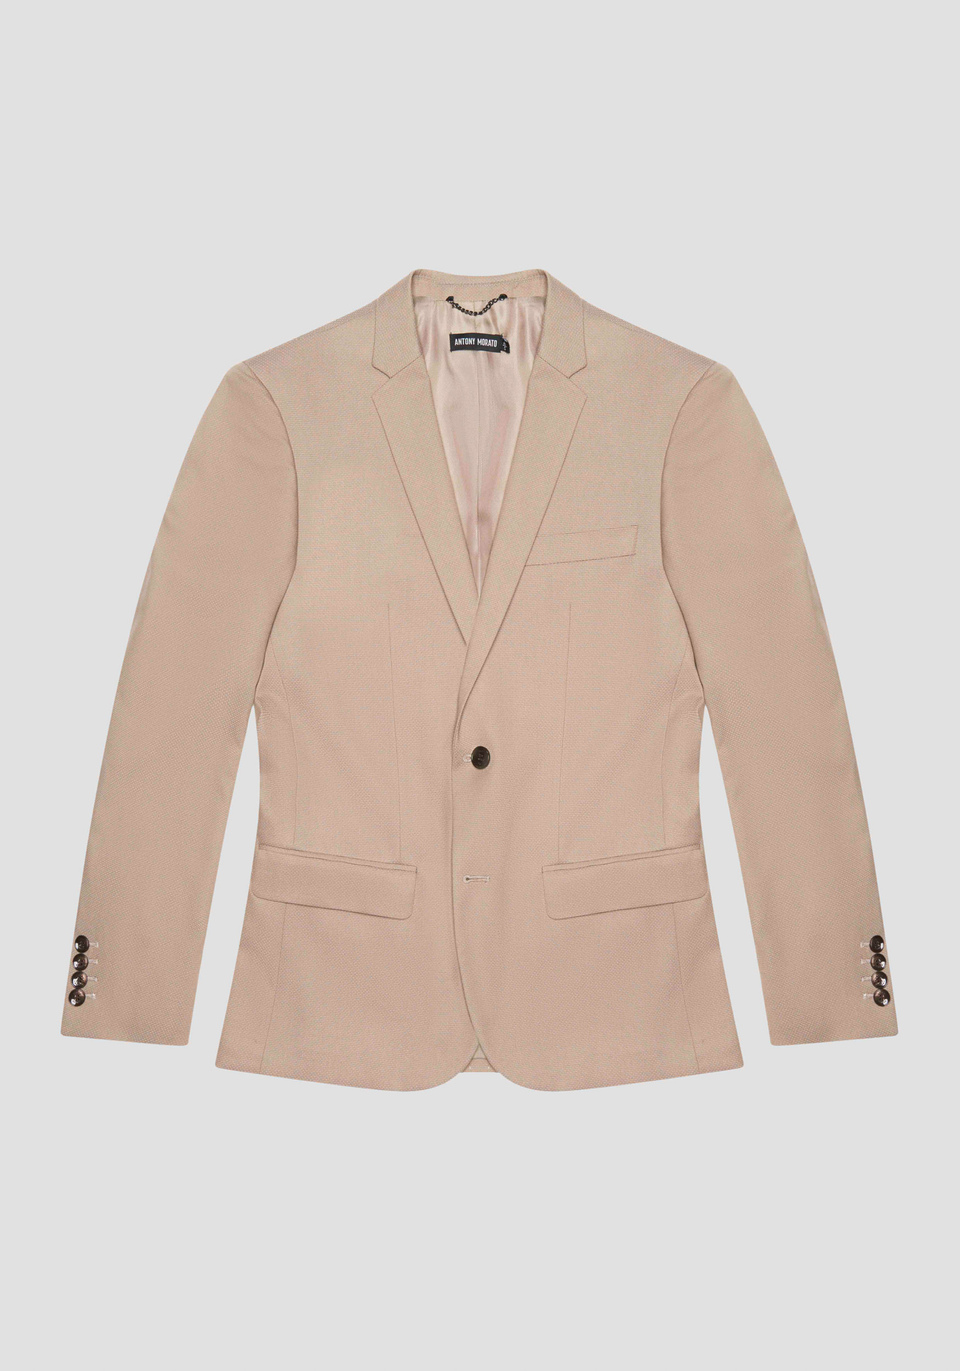 "BONNIE" SLIM FIT JACKET IN ELASTIC VISCOSE BLEND FABRIC WITH MICRO PATTERN - Antony Morato Online Shop